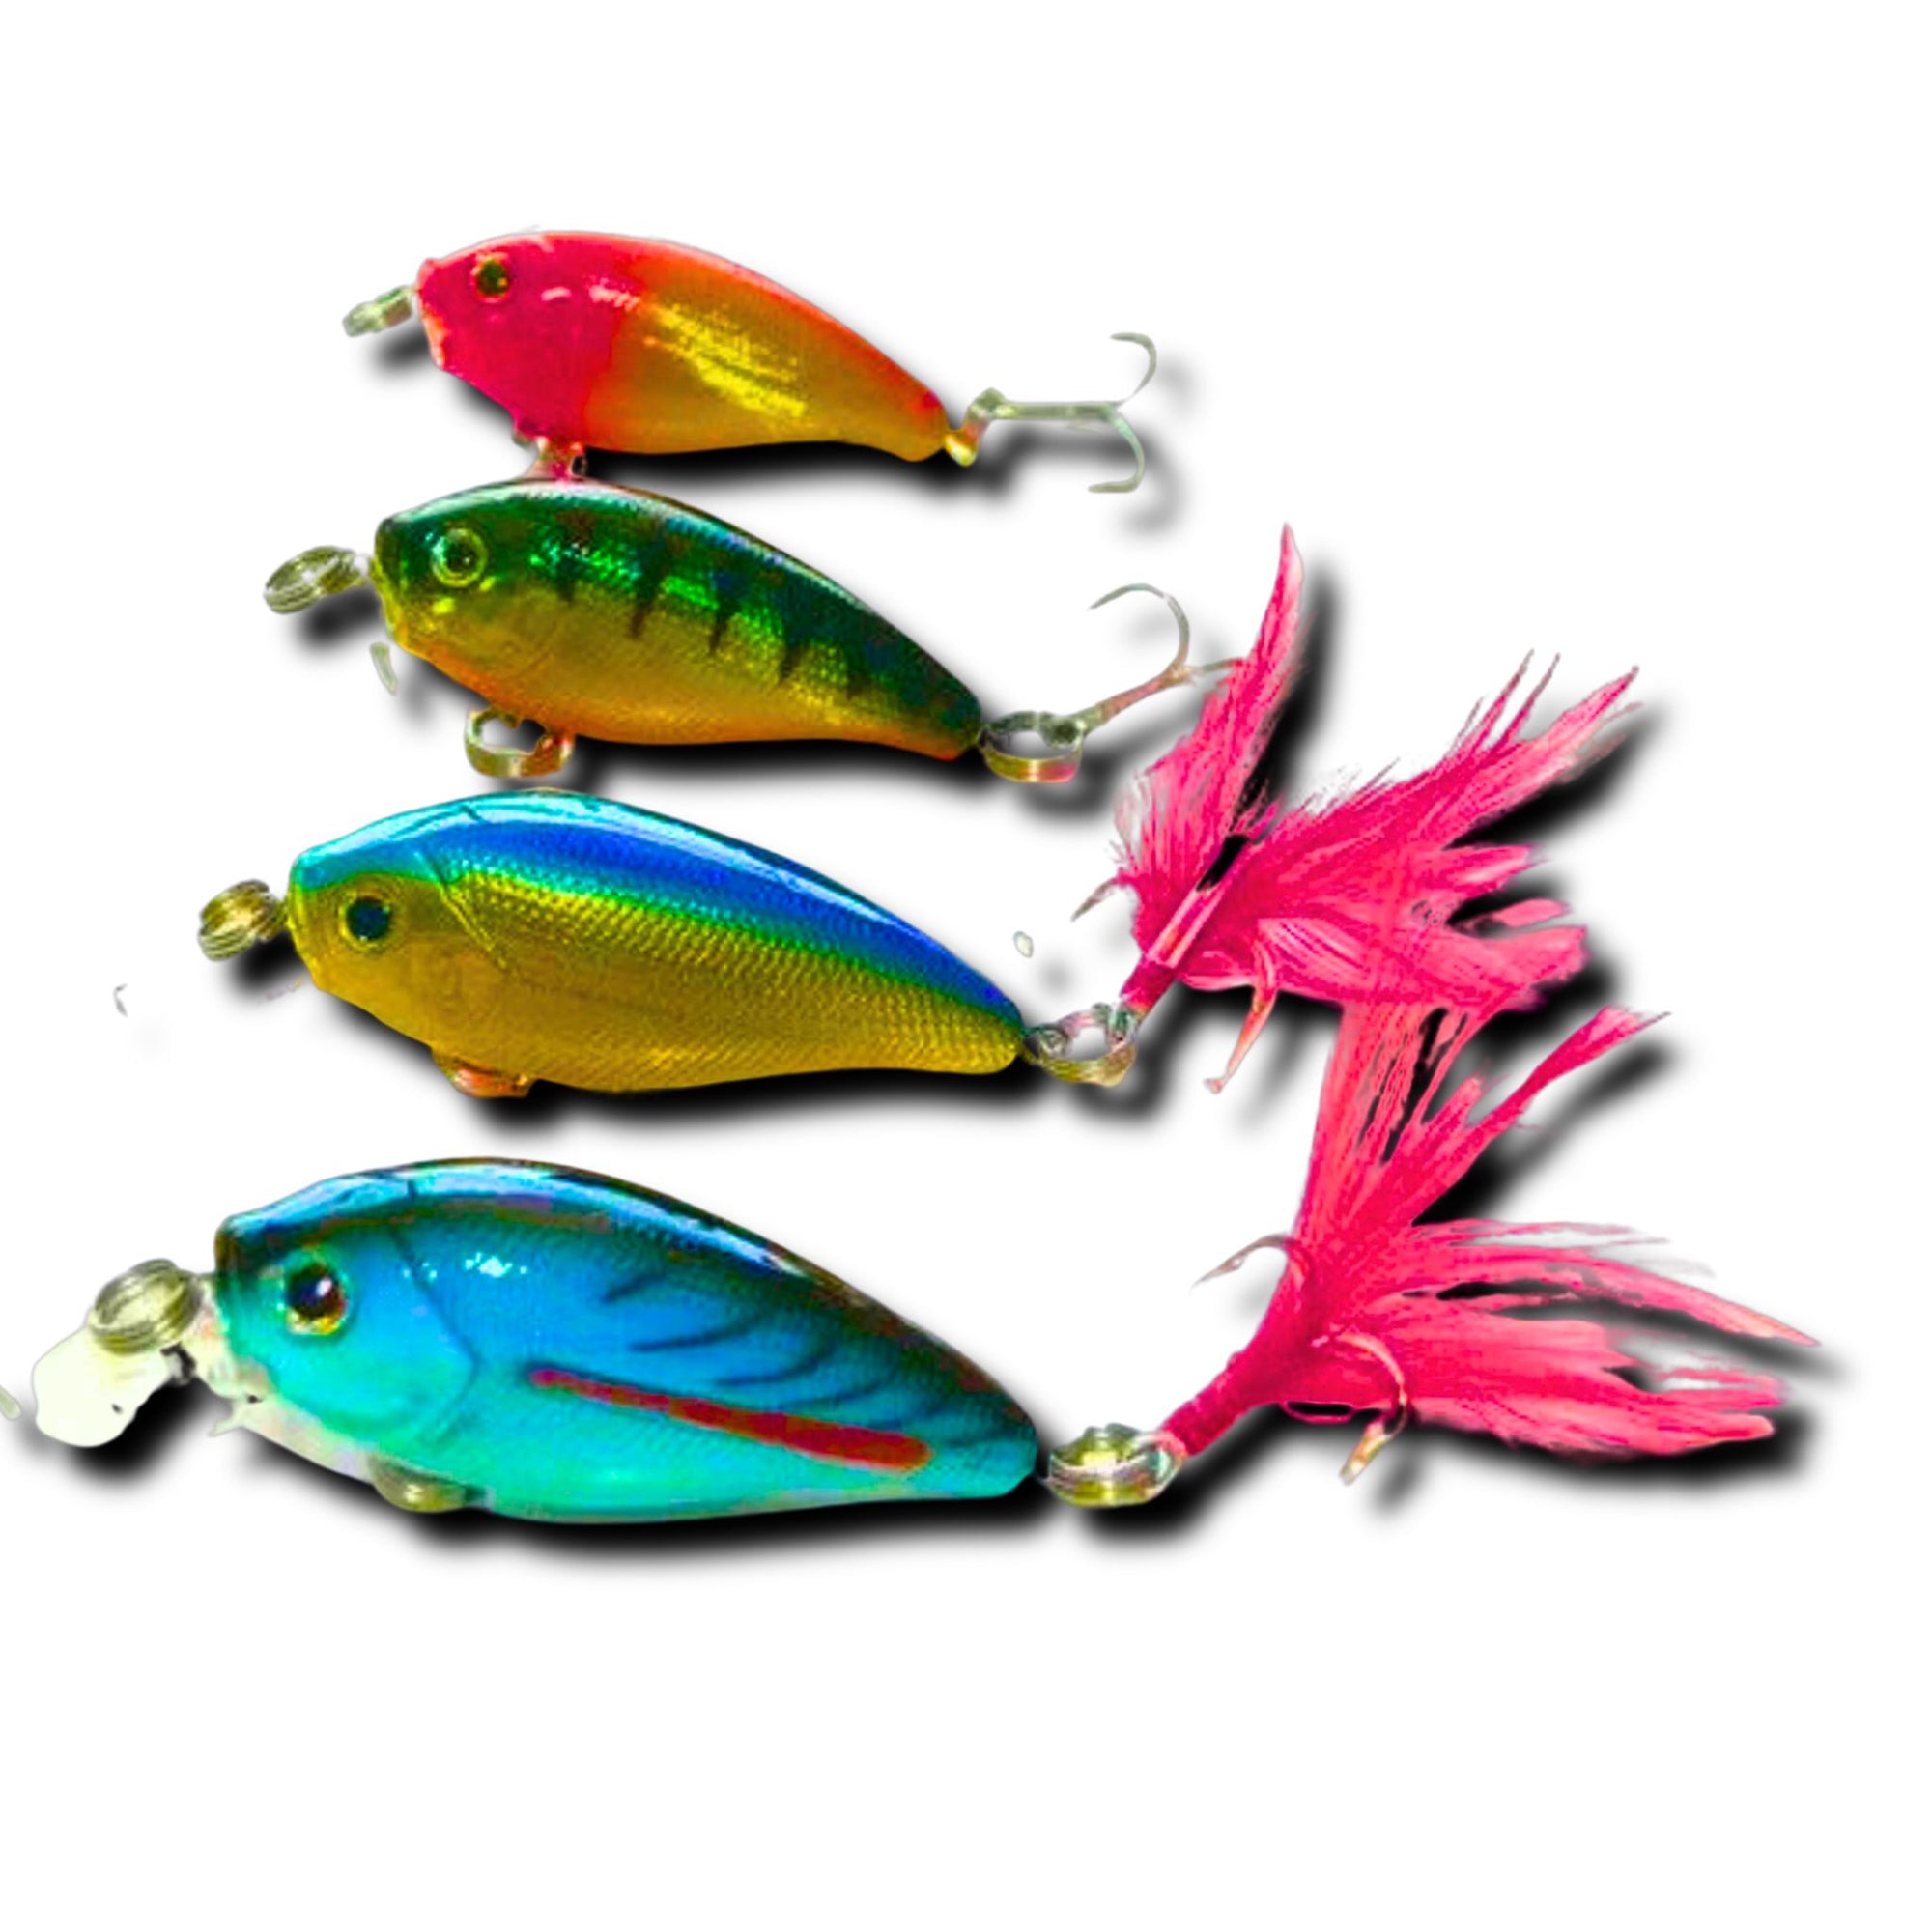 Kamikaze 4 pack with Lure Bag - Bella A - South East Clearance Centre